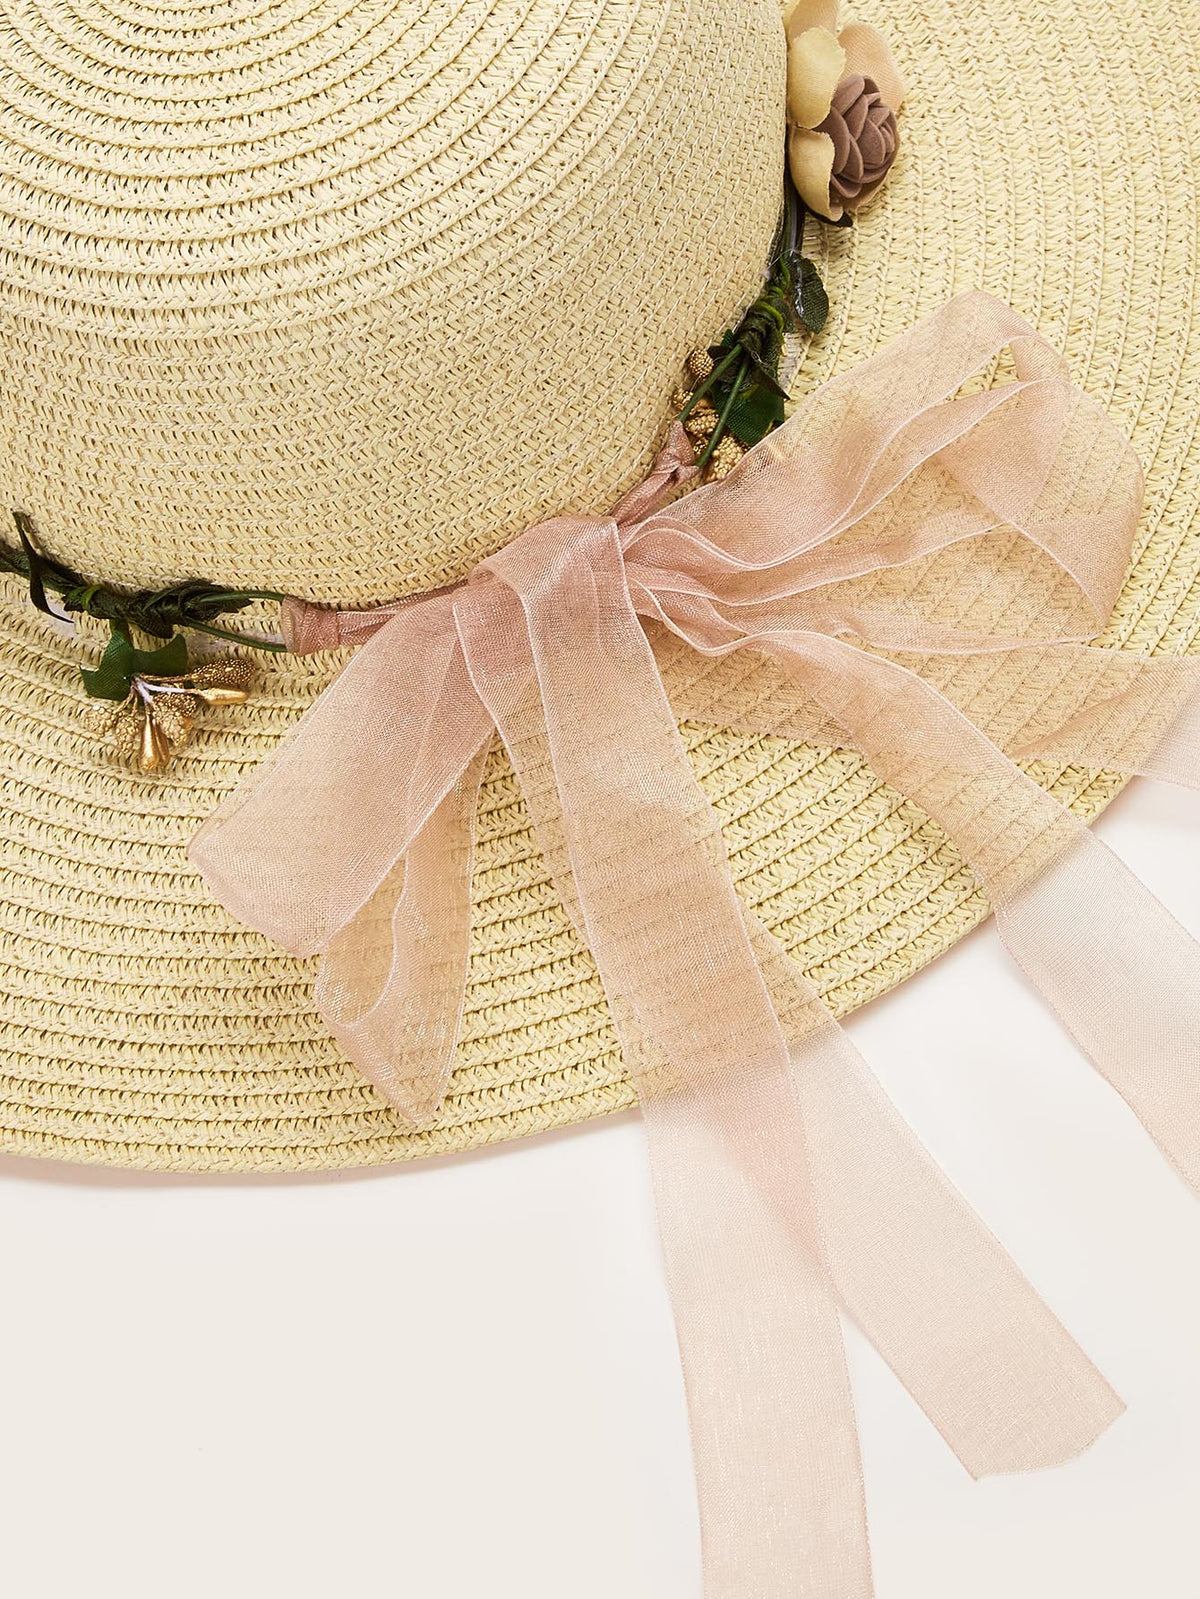 Straw Hat With Flowers - 